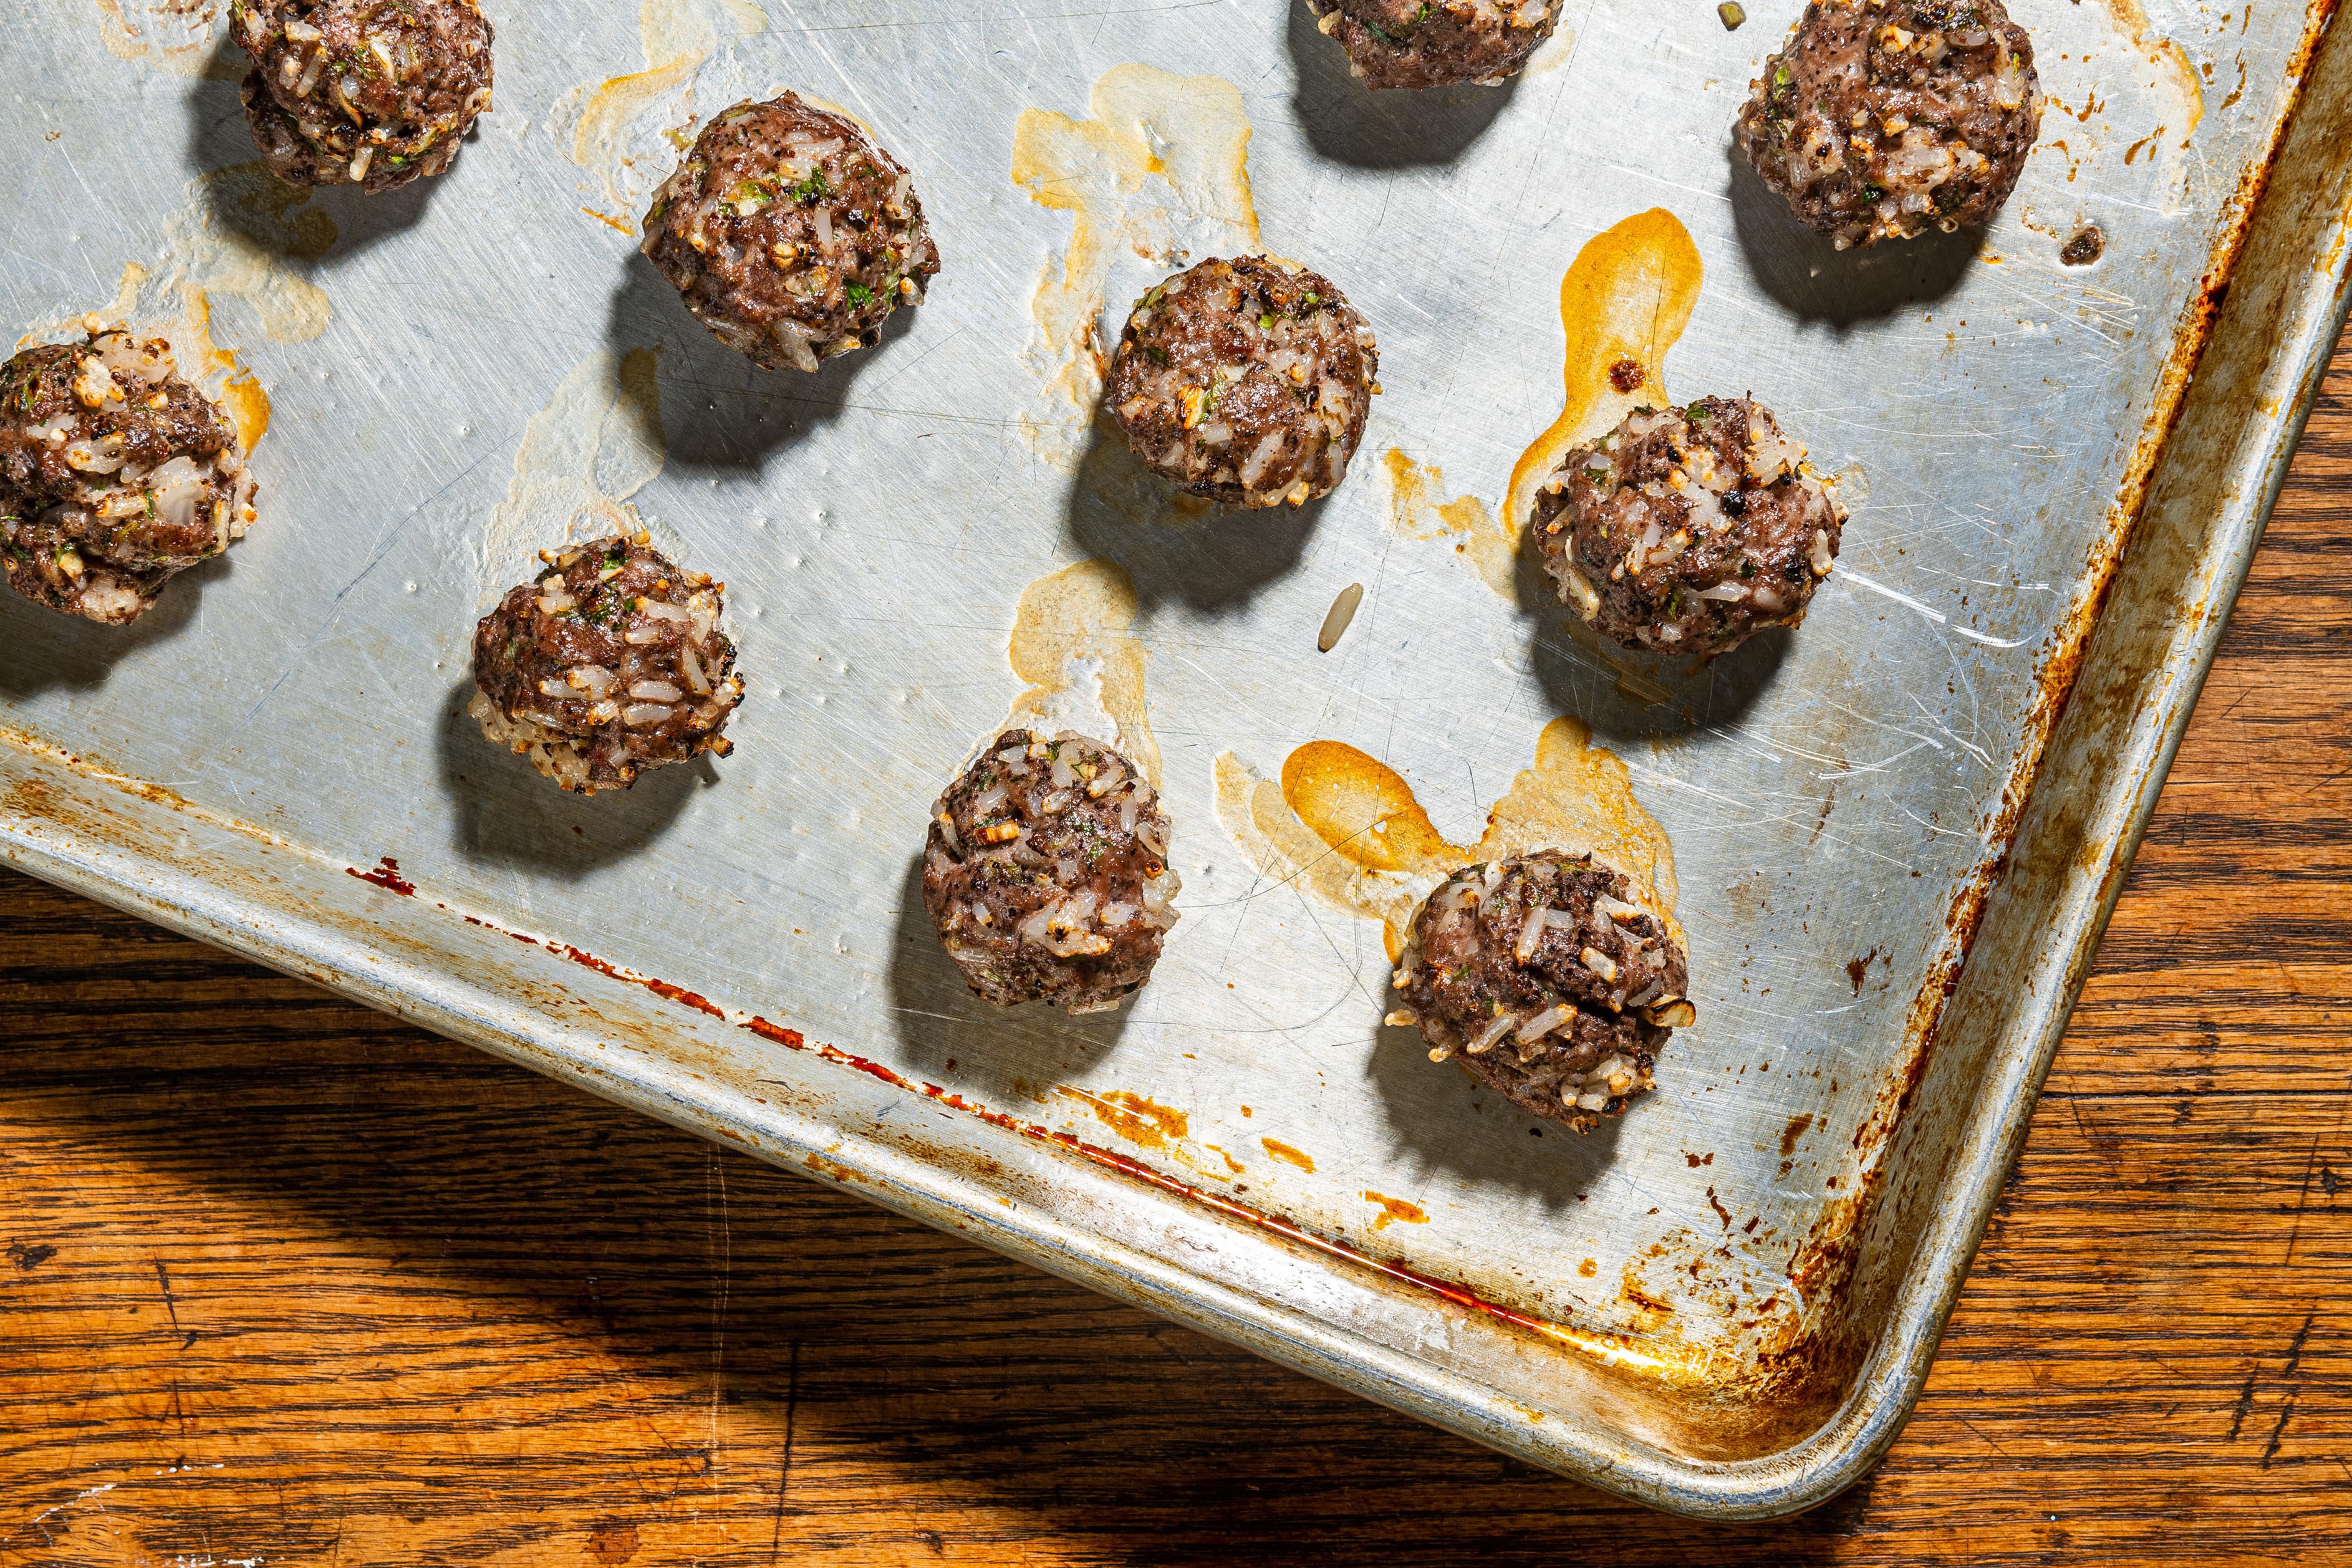 Sumac adds a lemony tang to these roasted lamb meatballs